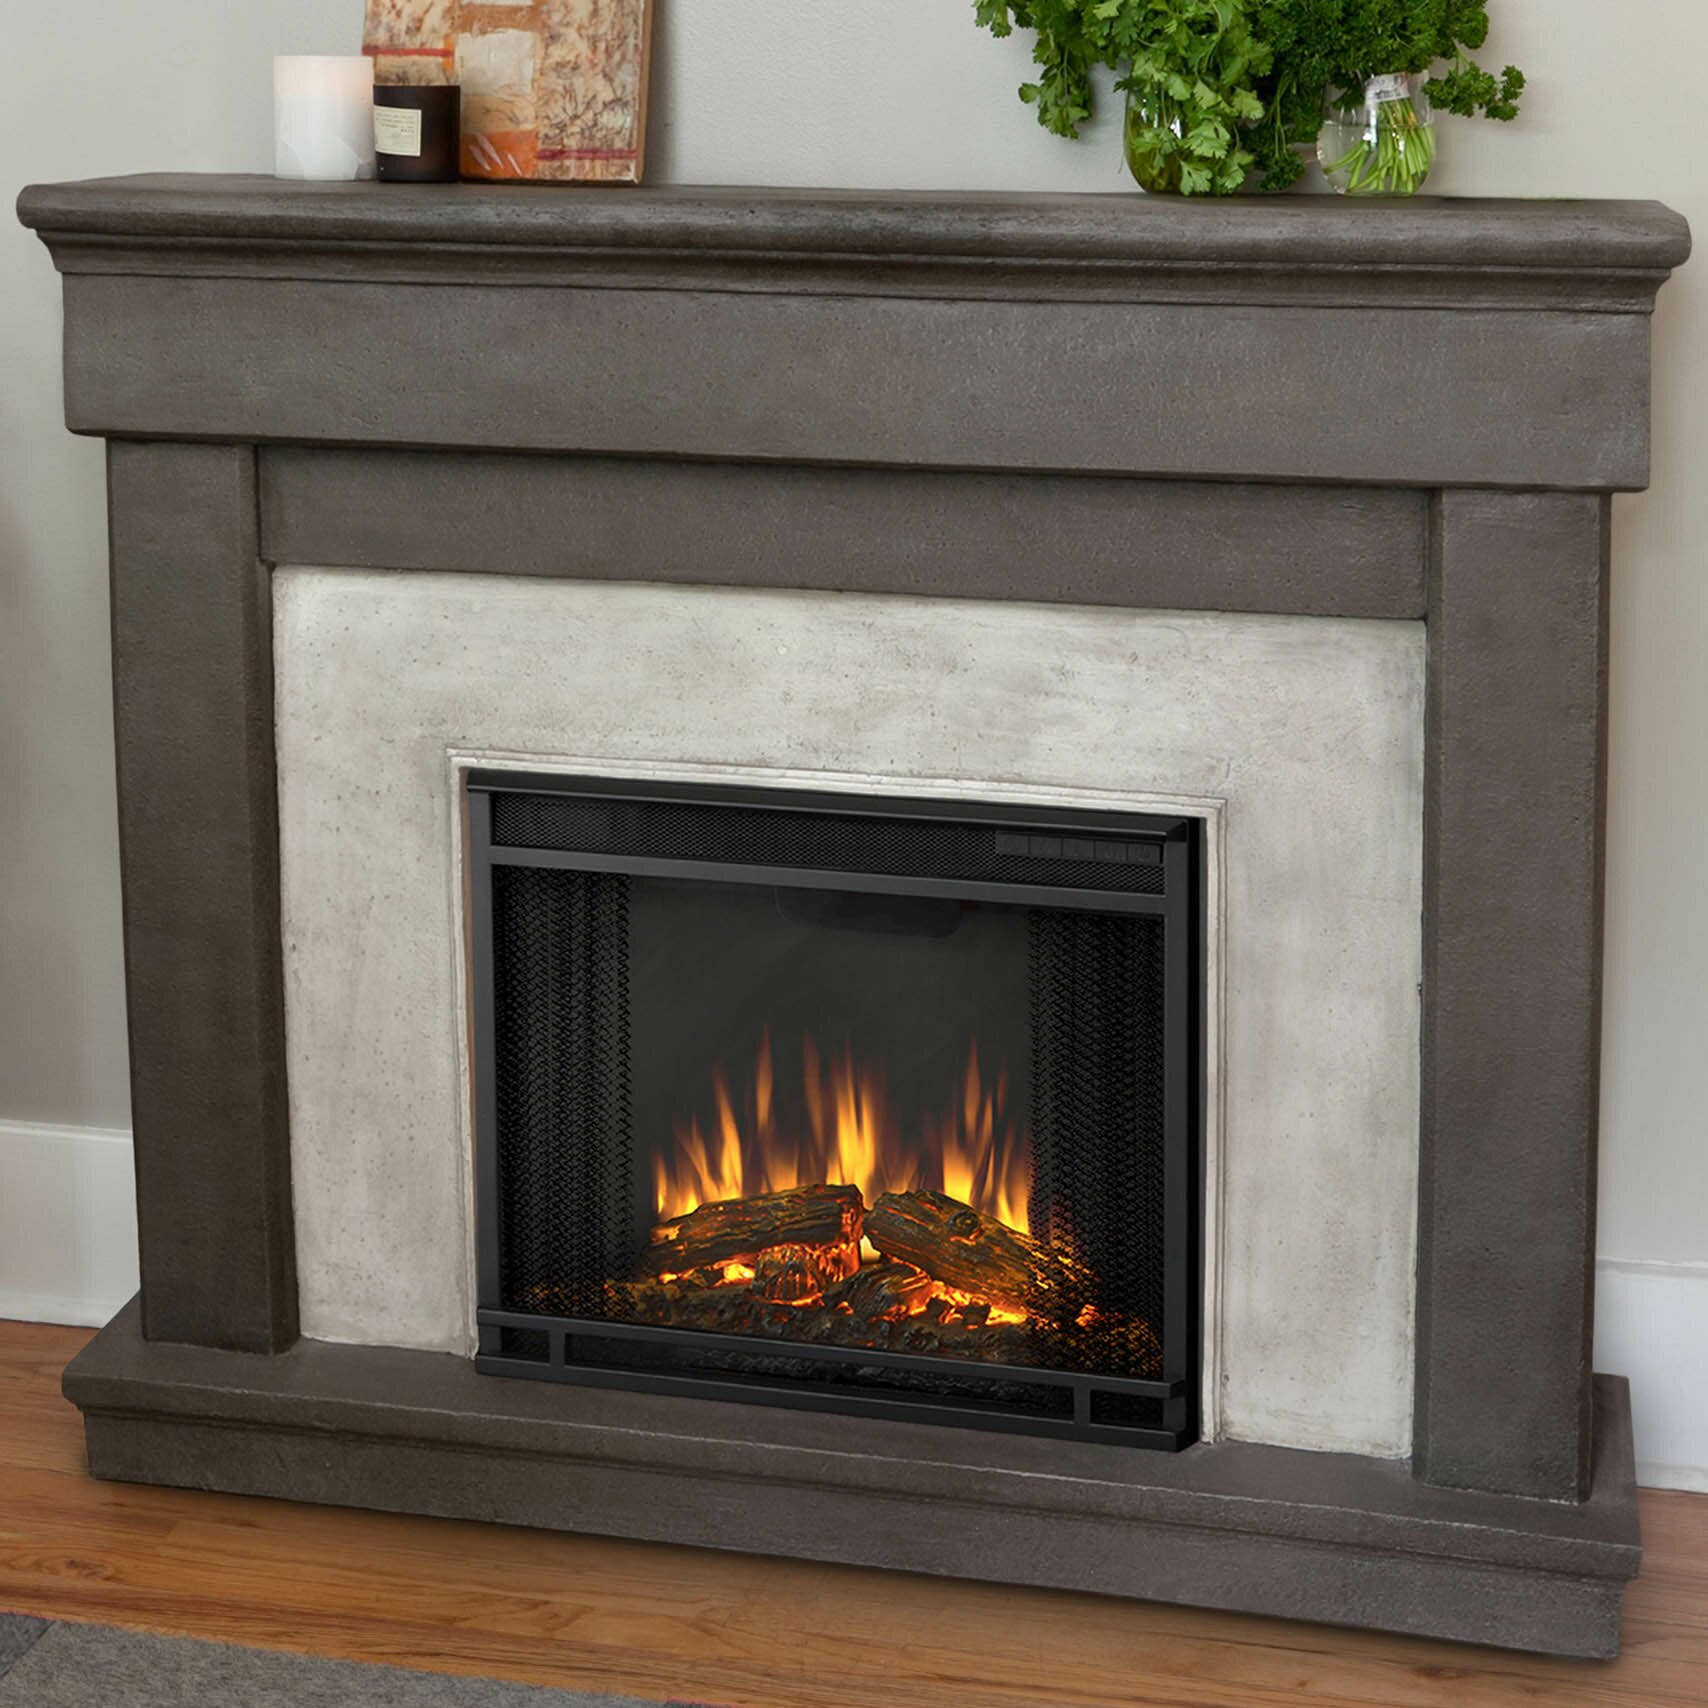 Electric Fireplace And Mantel
 Real Flame Cast Mantel Cascade Electric Fireplace